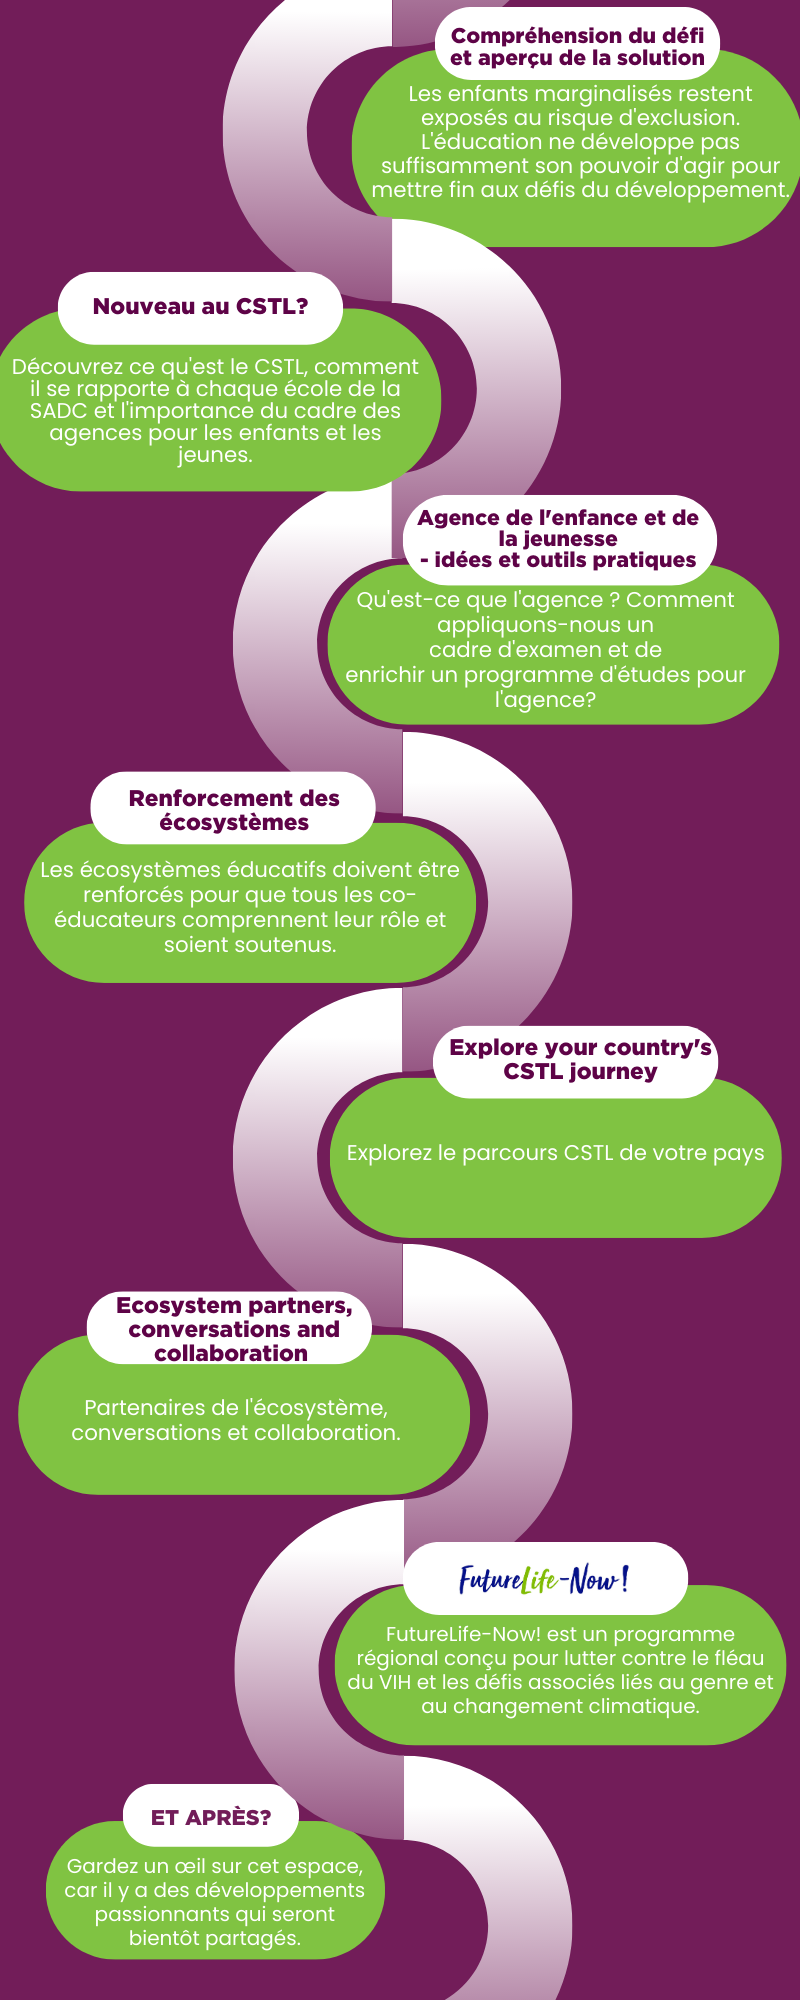 CSTL roadmap - French and Portuguese.png